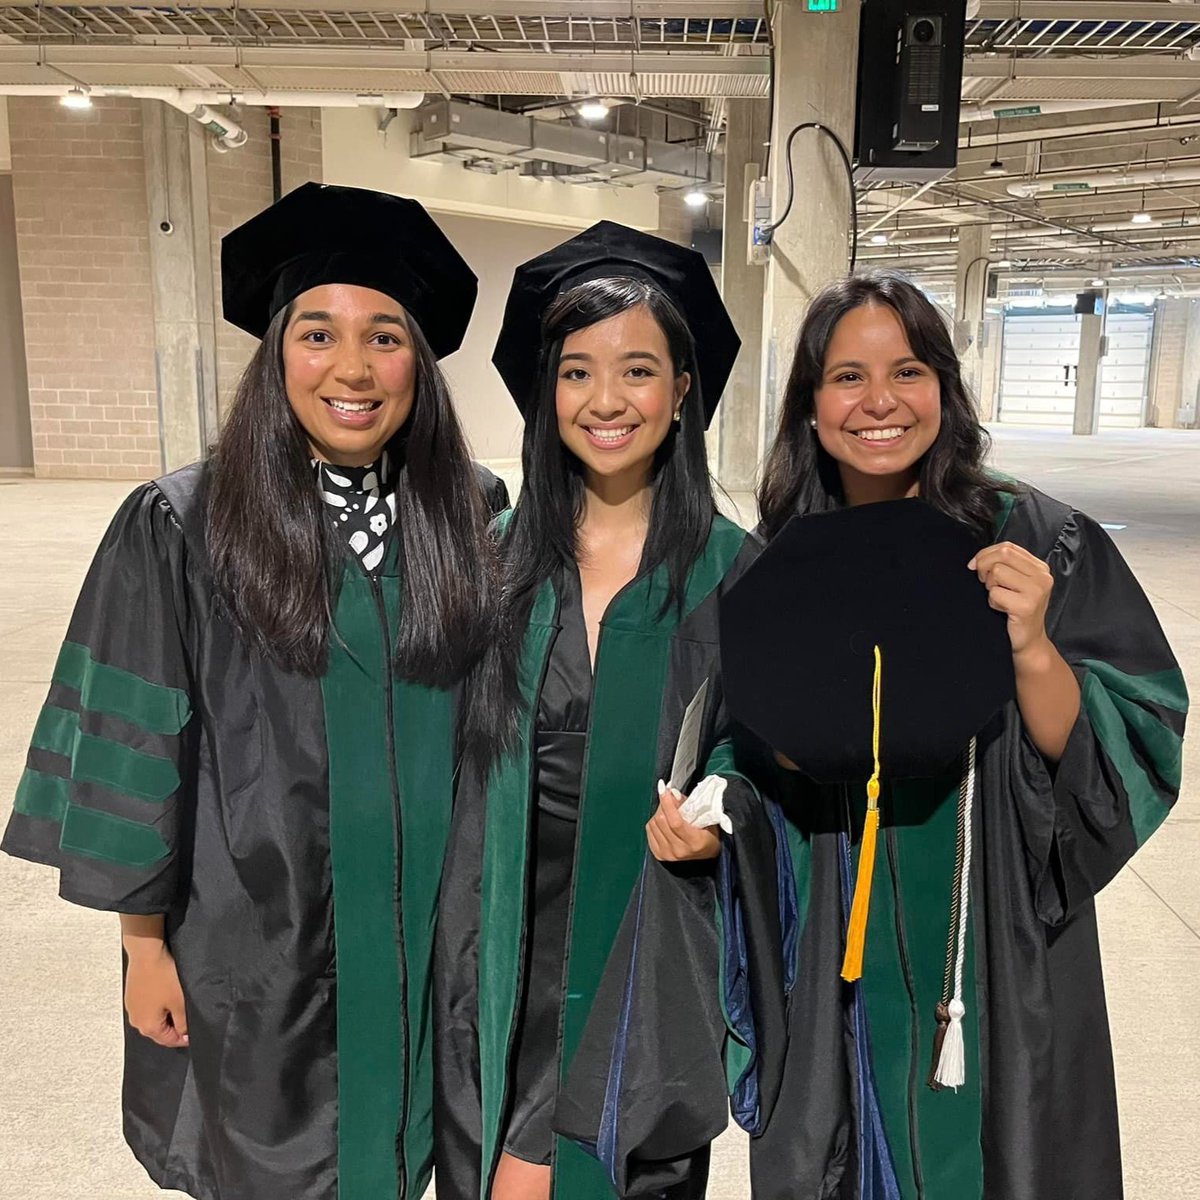 Well-deserved congratulations to the graduates of University of North Texas Health Science Center Texas College of Osteopathic Medicine! Your hard work and commitment have paid off. Best wishes for a successful future! #DOProud #OsteopathicMedicine @TCOM_UNTHSC